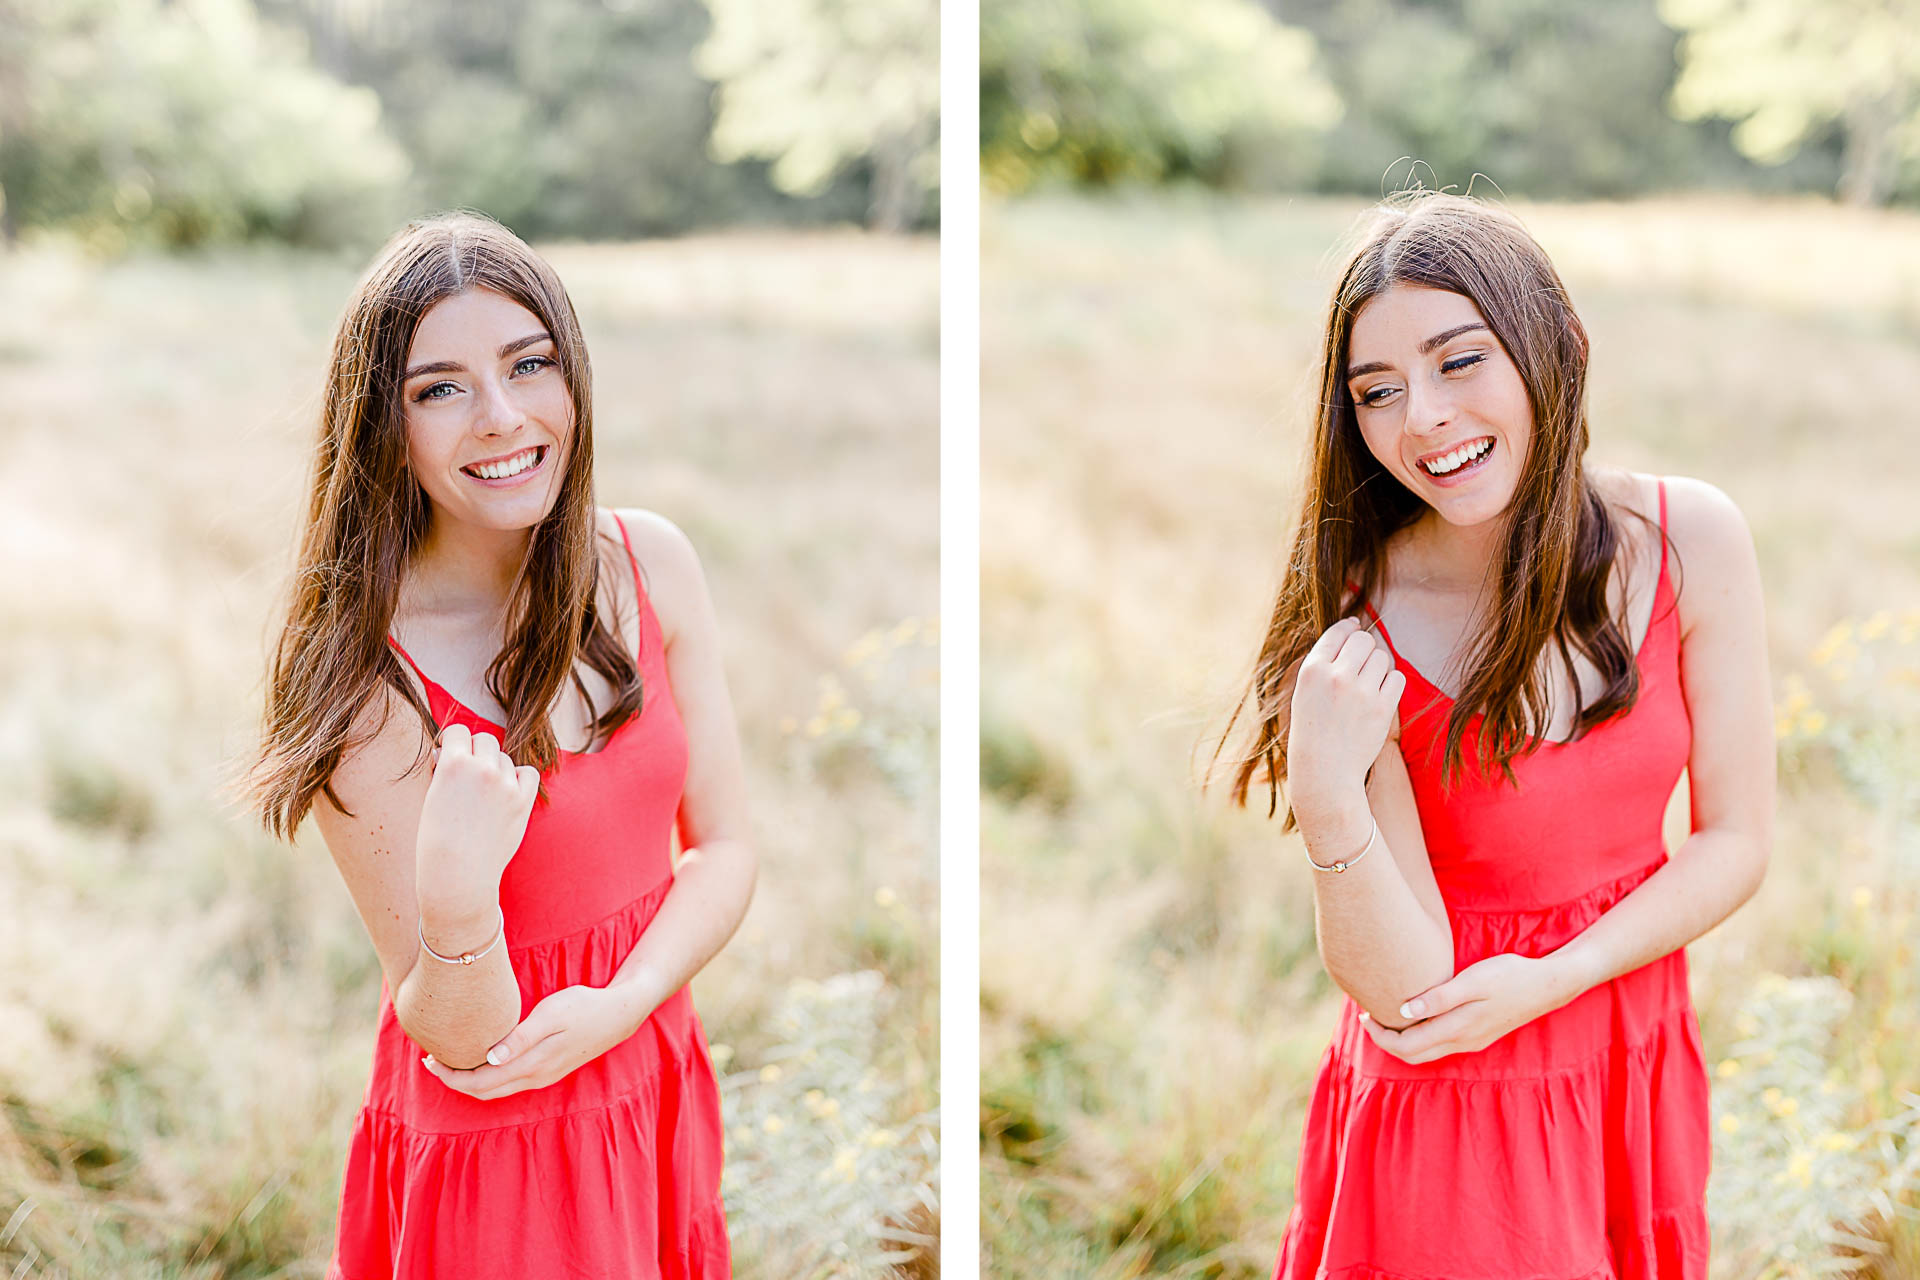 Photo by Duxbury senior portrait photographer Christina Runnals | High school senior girl wearing a red dress and smiling for her senior pictures